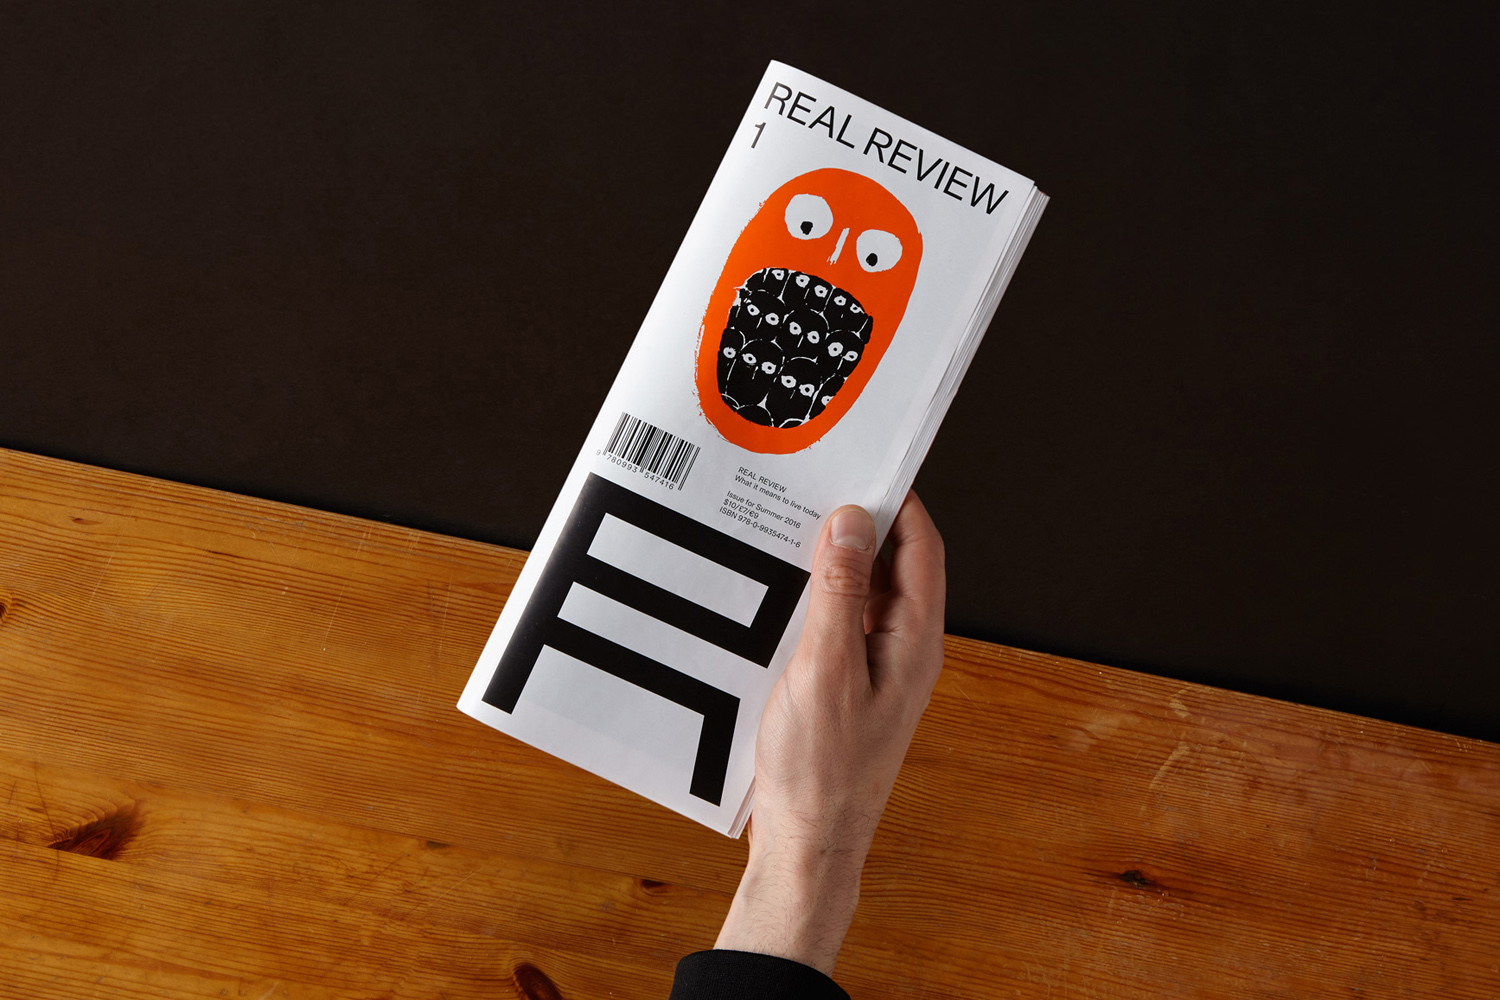 BP&O takes a hands on look at quarterly magazine Real Review, a collaboration between by OK-RM and Jack Self